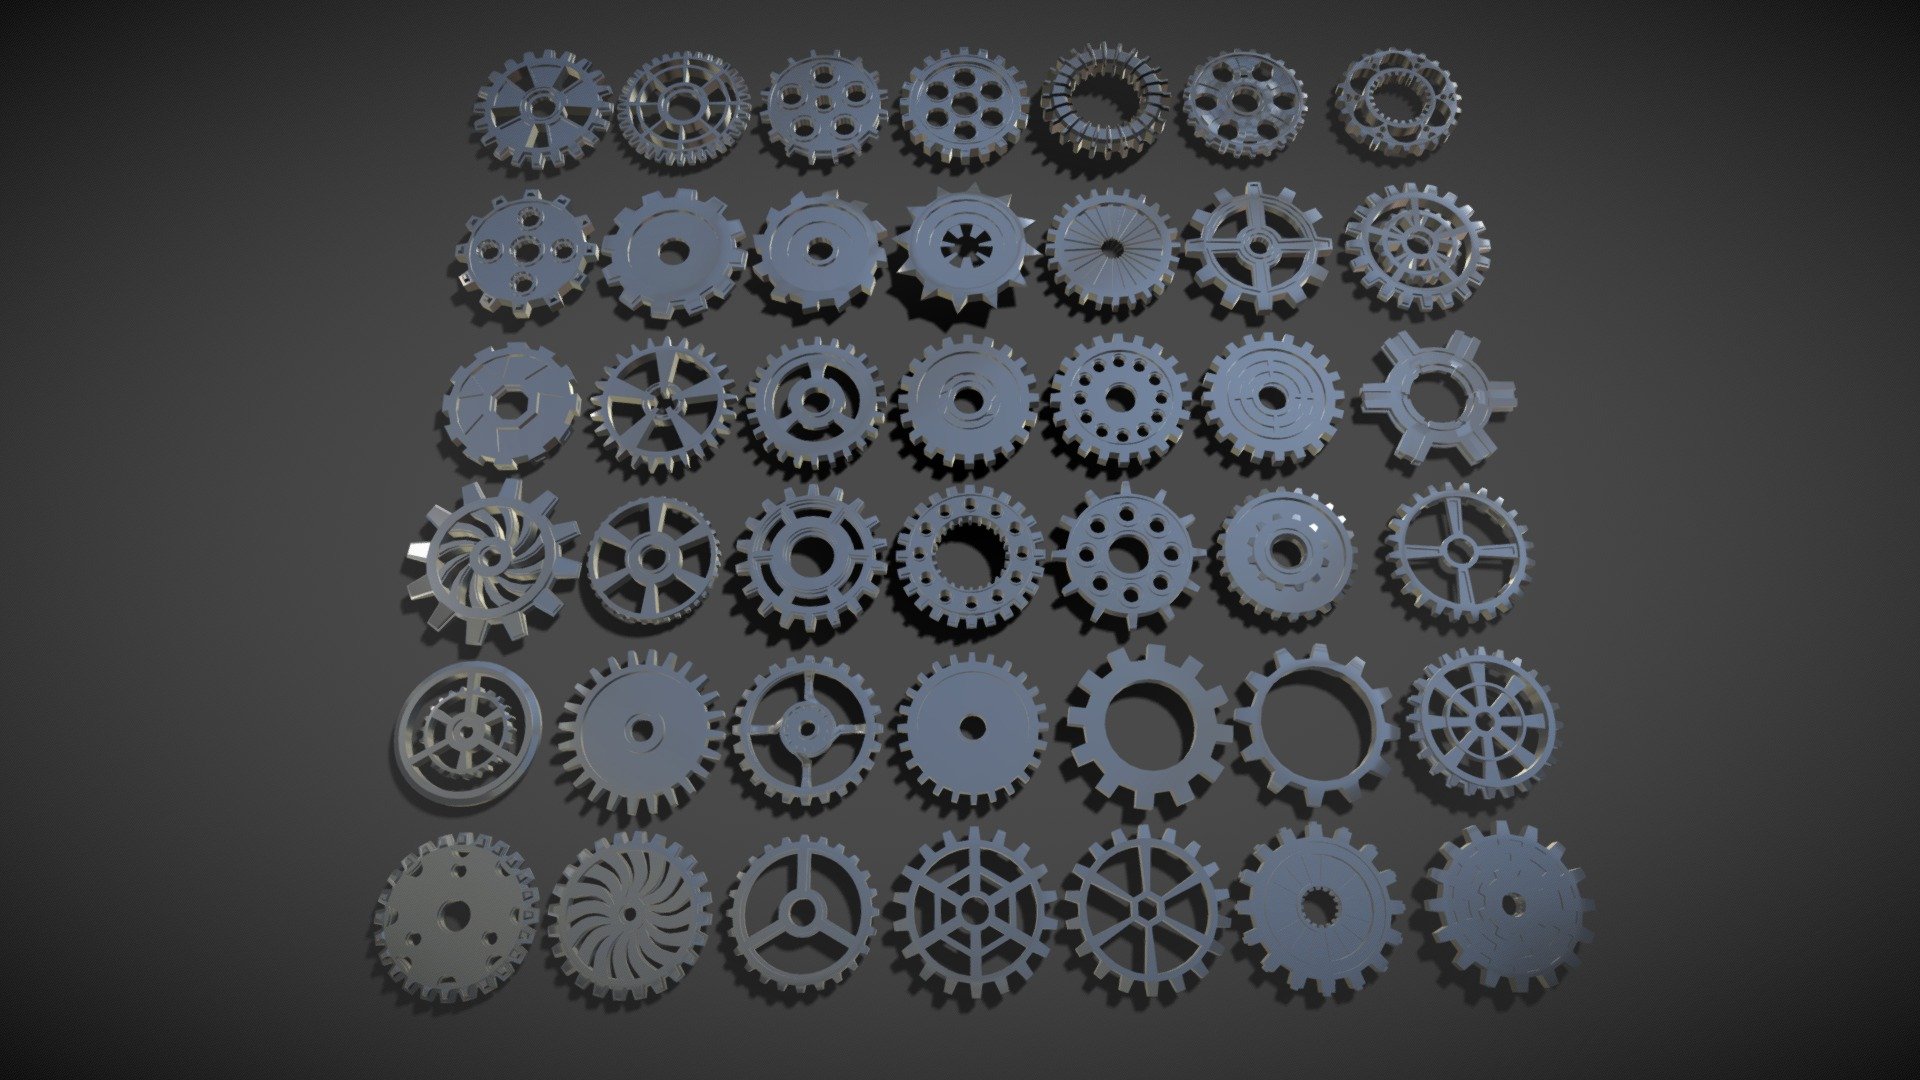 Get pack - https://www.artstation.com/a/15287

42 low poly gears

include max(2018), blend(2.8), fbx, obj and stl files

poly 54999

vert 53164 - 42 low poly gears - 3D model by 3d.armzep 3d model